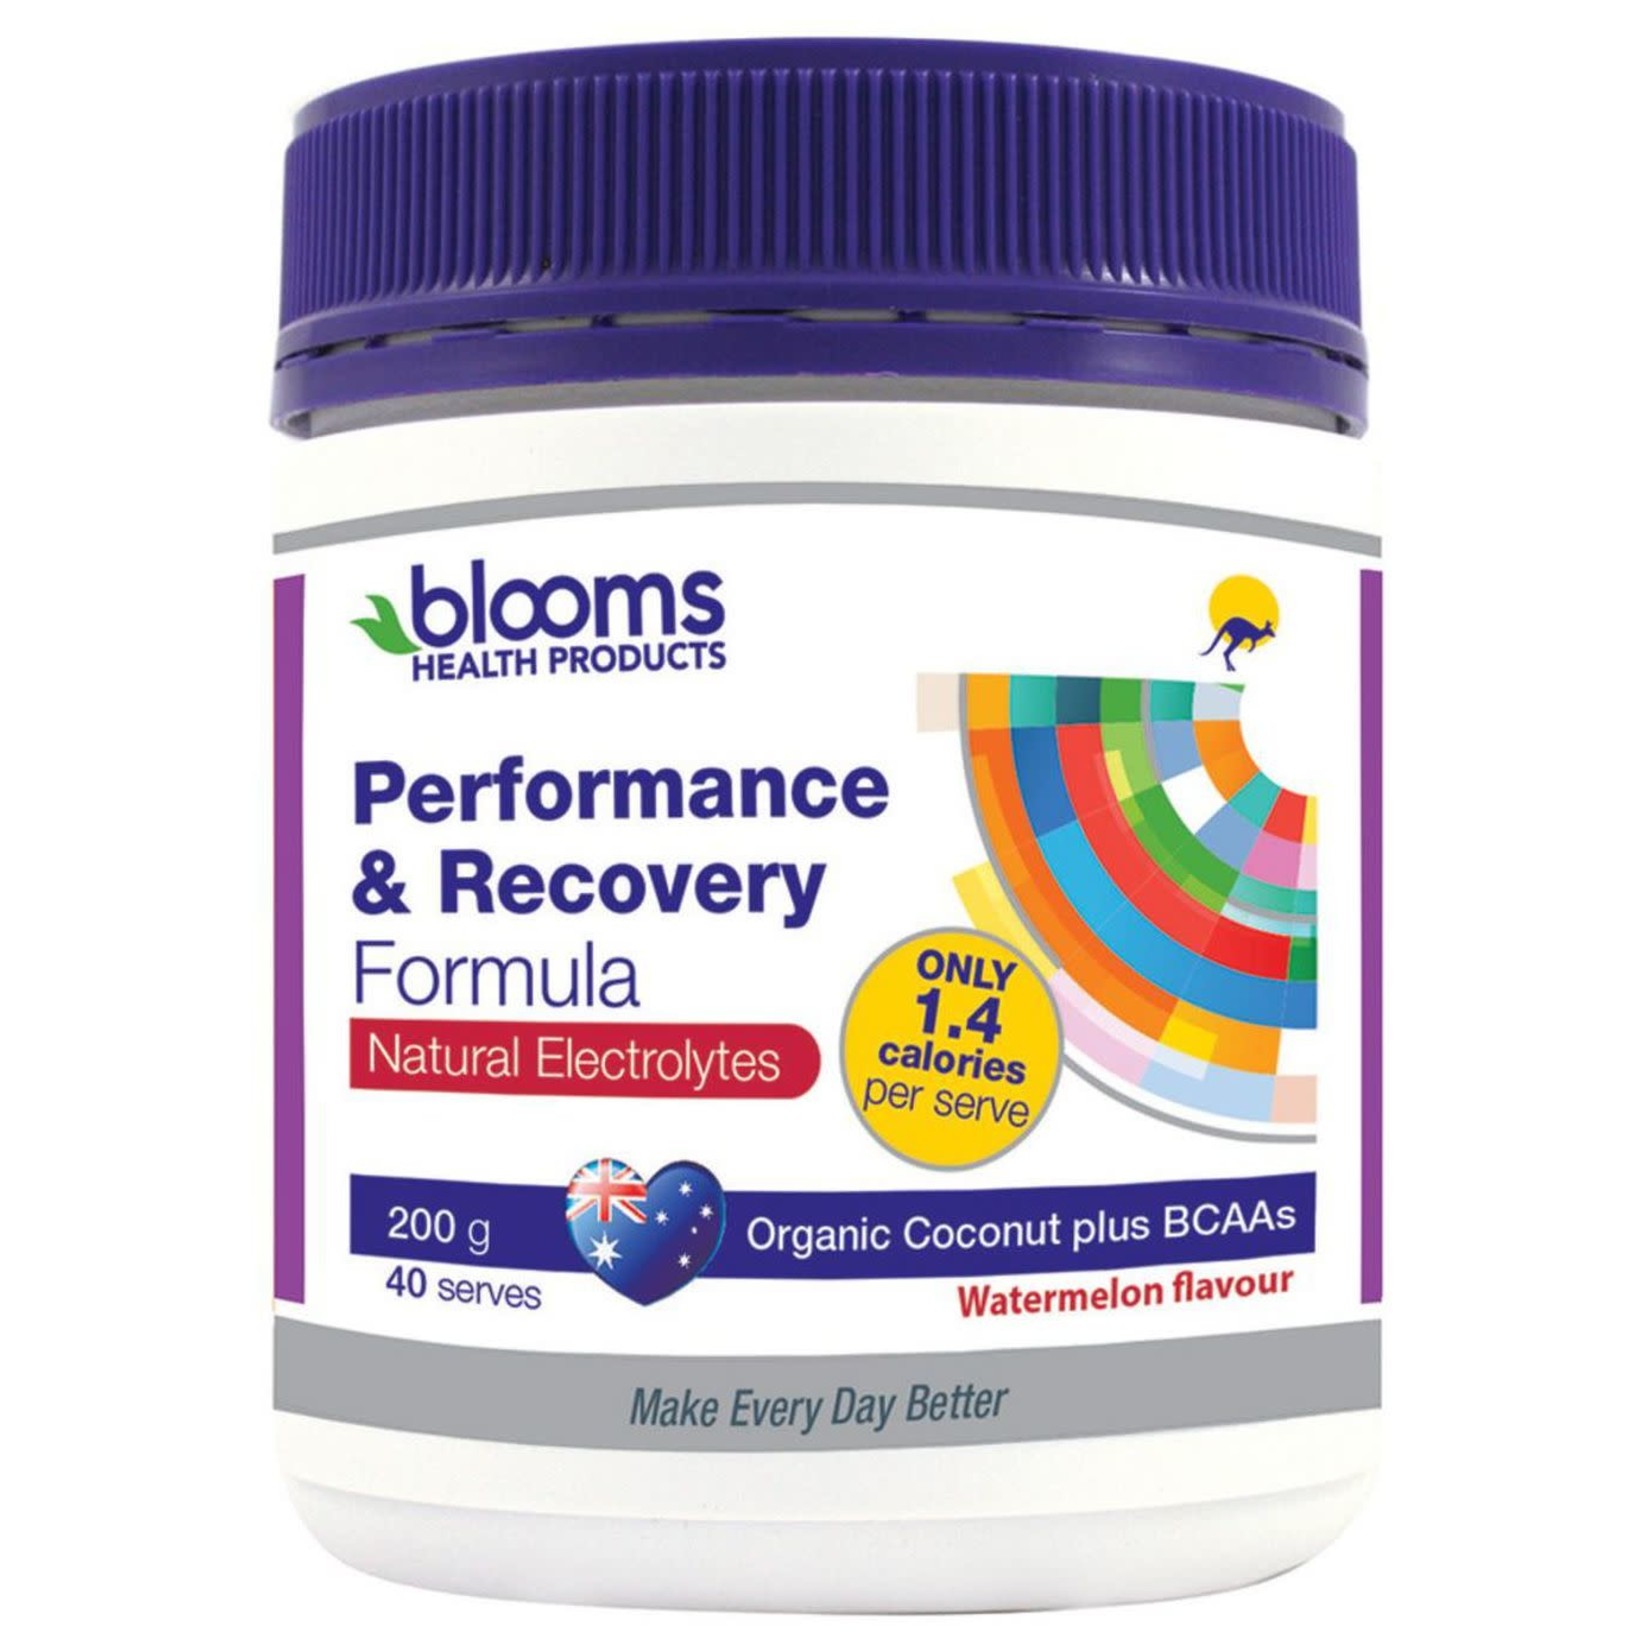 Blooms Blooms Performance & Recovery Formula 200 g Powder